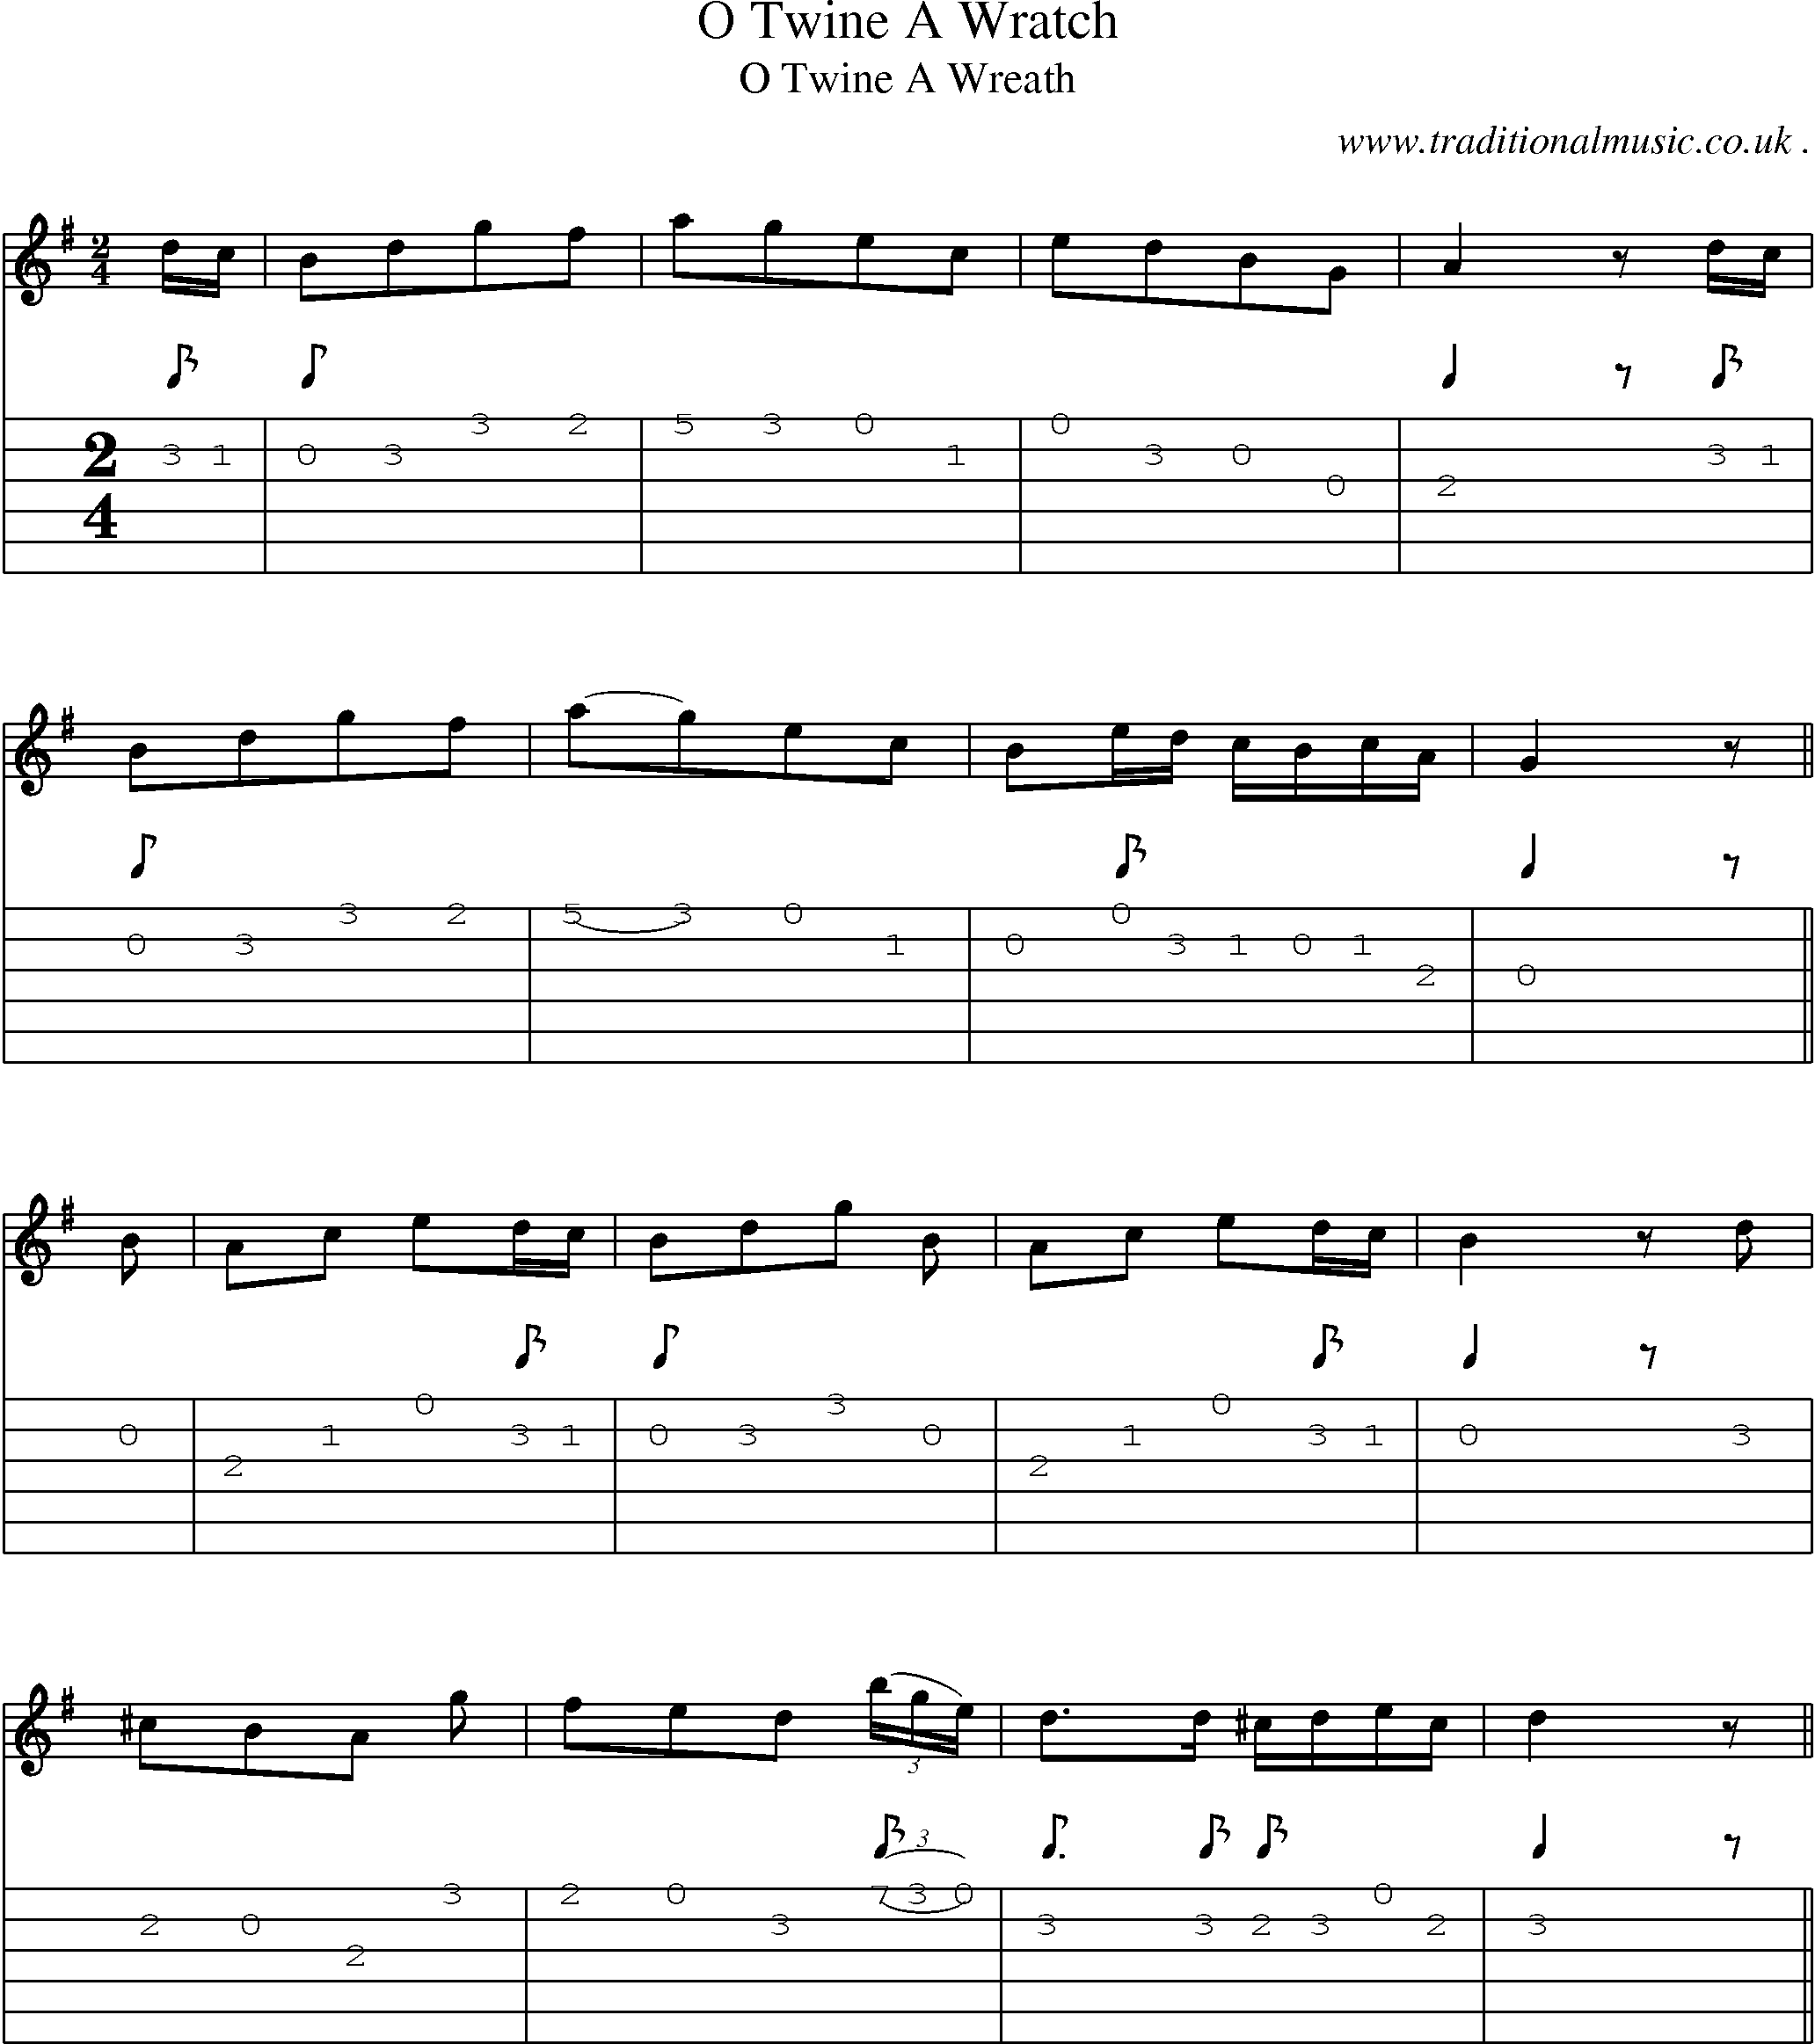 Sheet-Music and Guitar Tabs for O Twine A Wratch